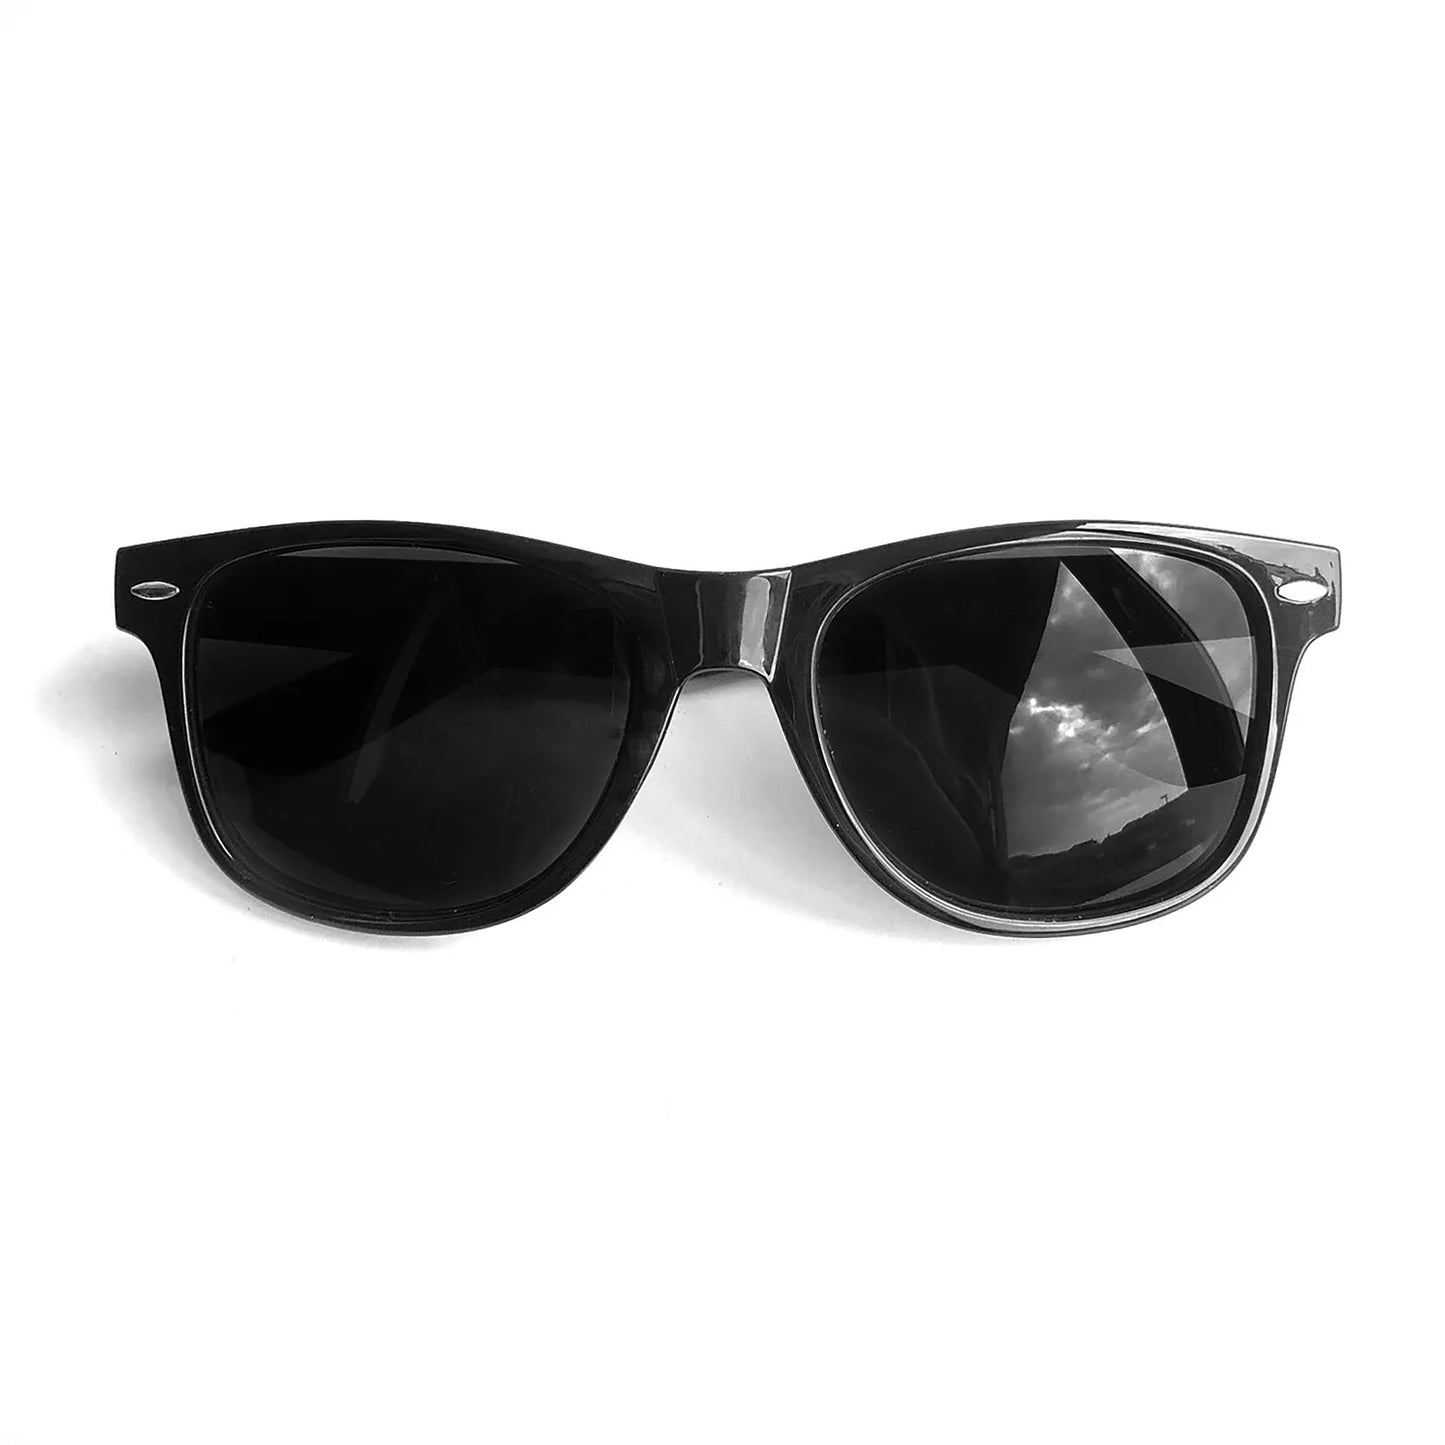 'See You In Hell' Sunglasses